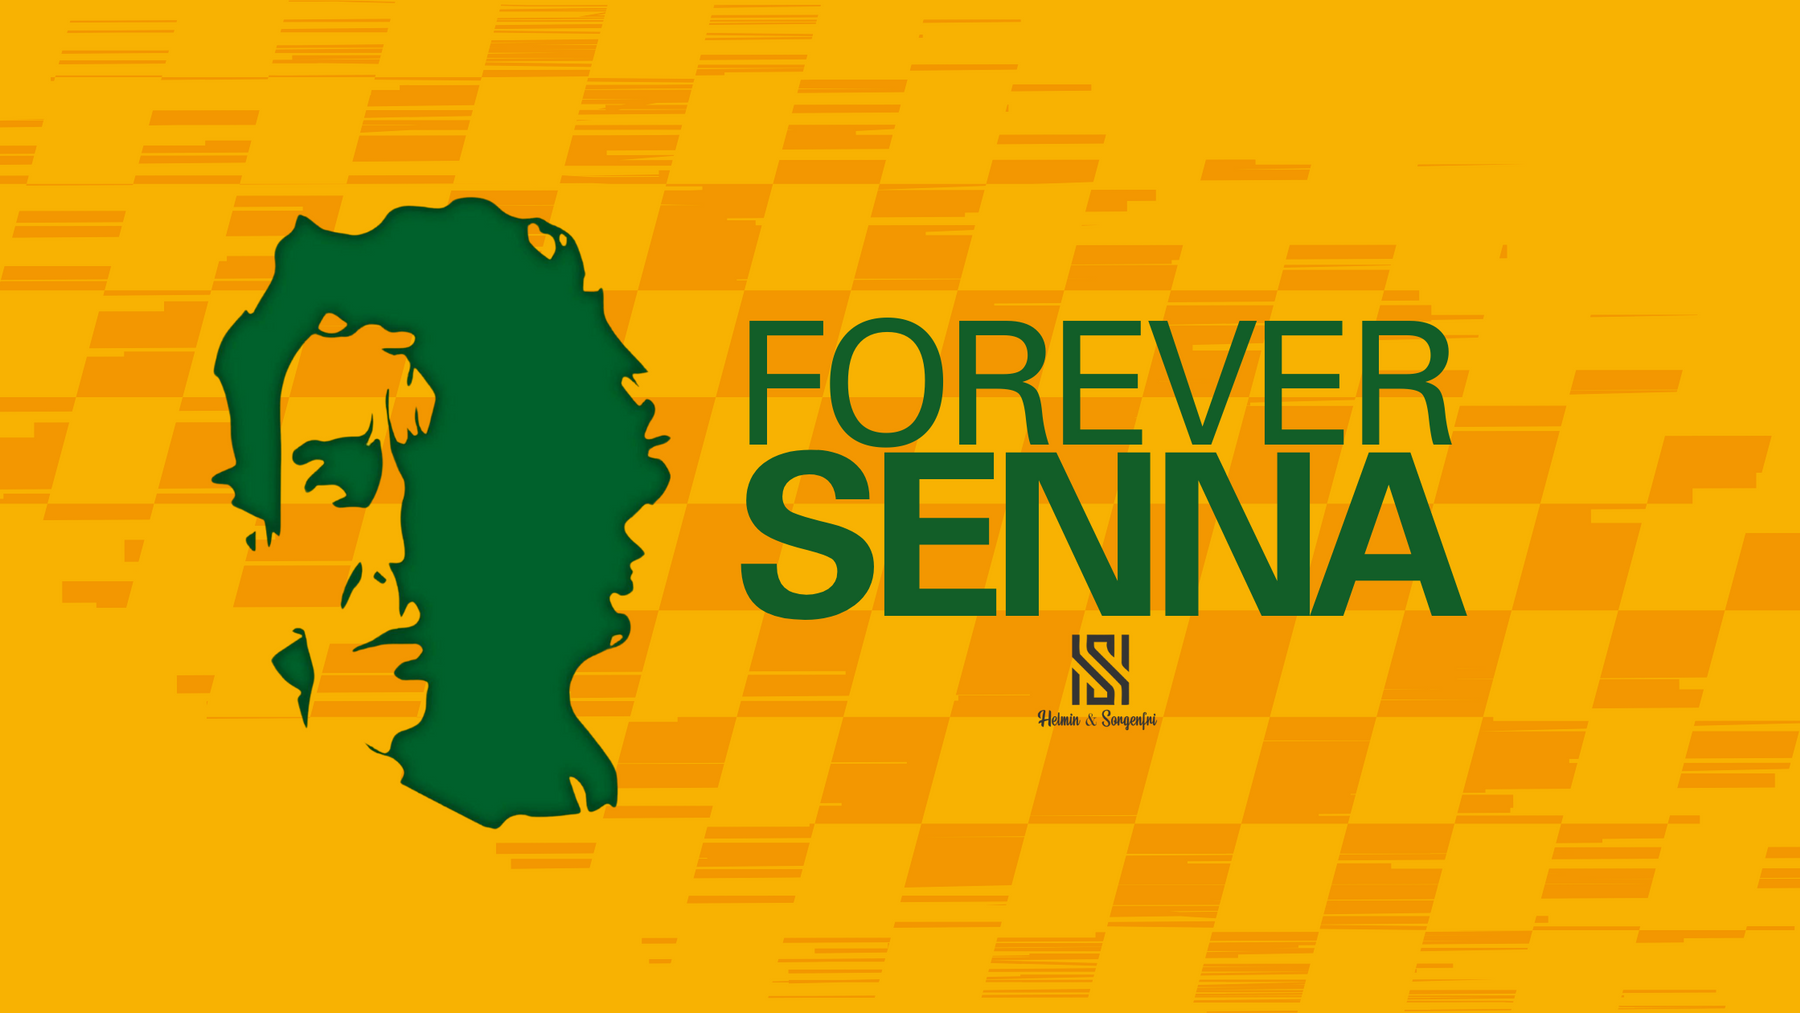 May Book of the Month: Forever Senna